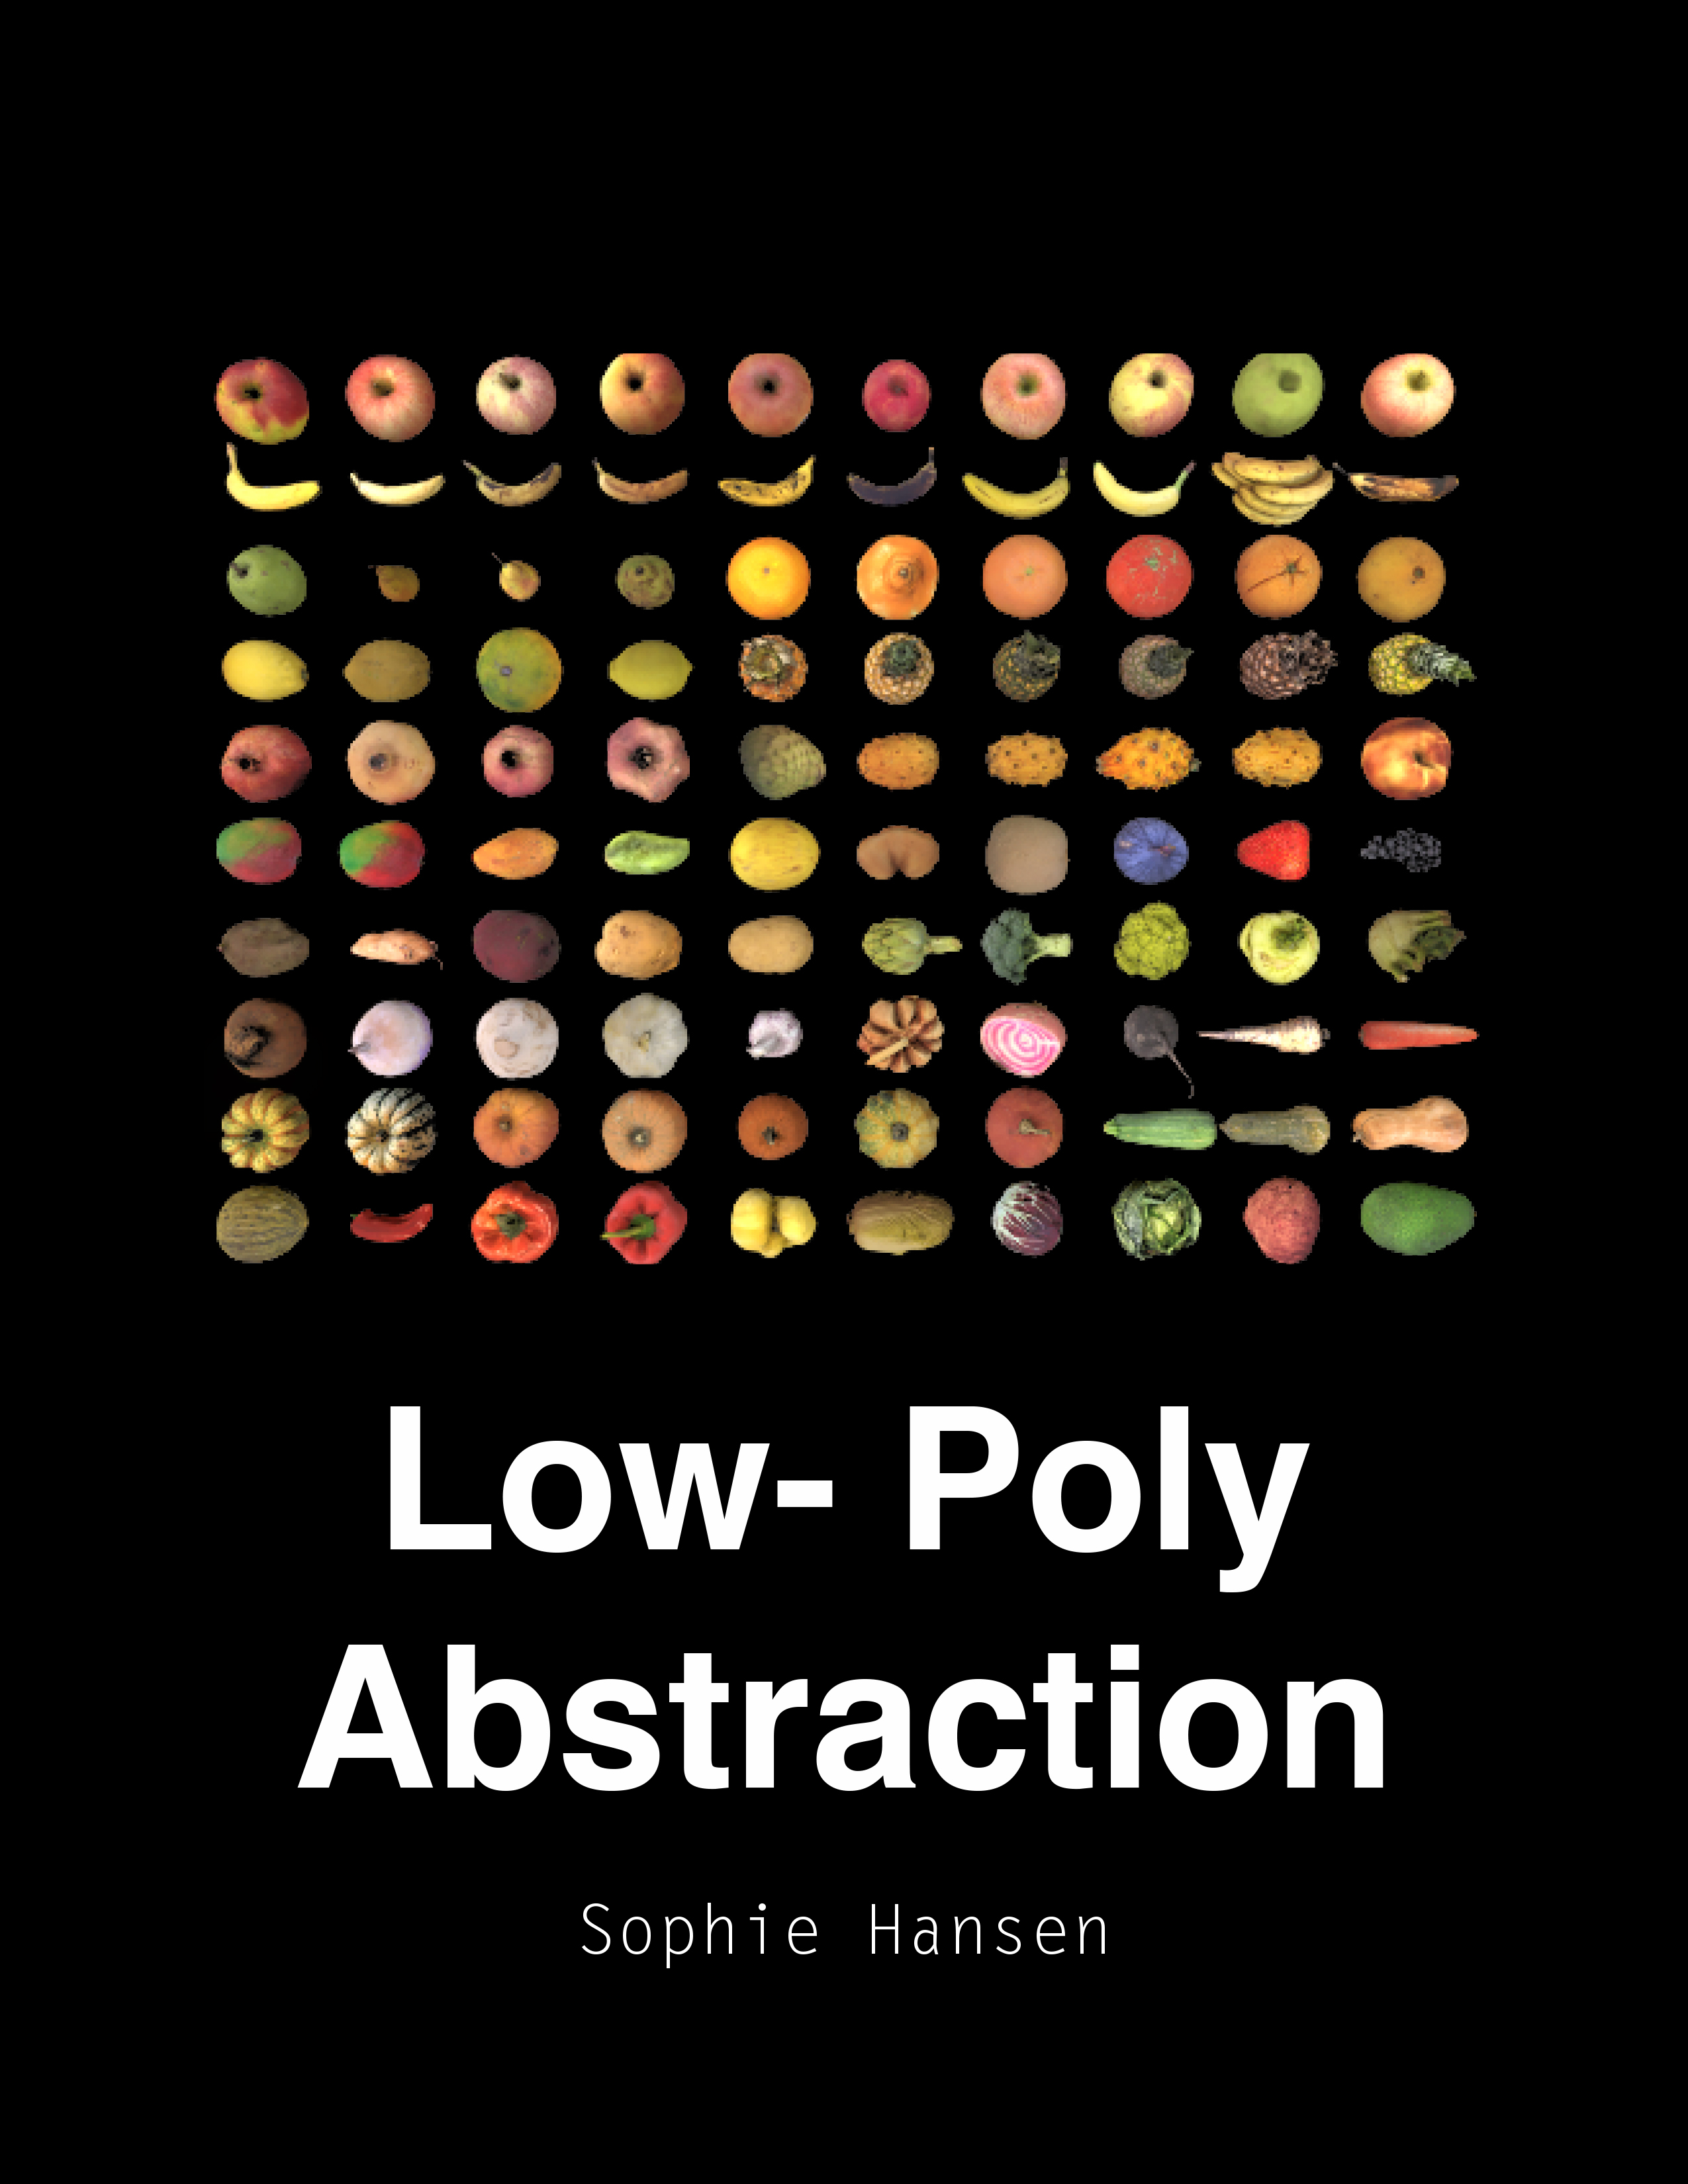 "Low-Poly Abstraction" by Sophia Hansen.